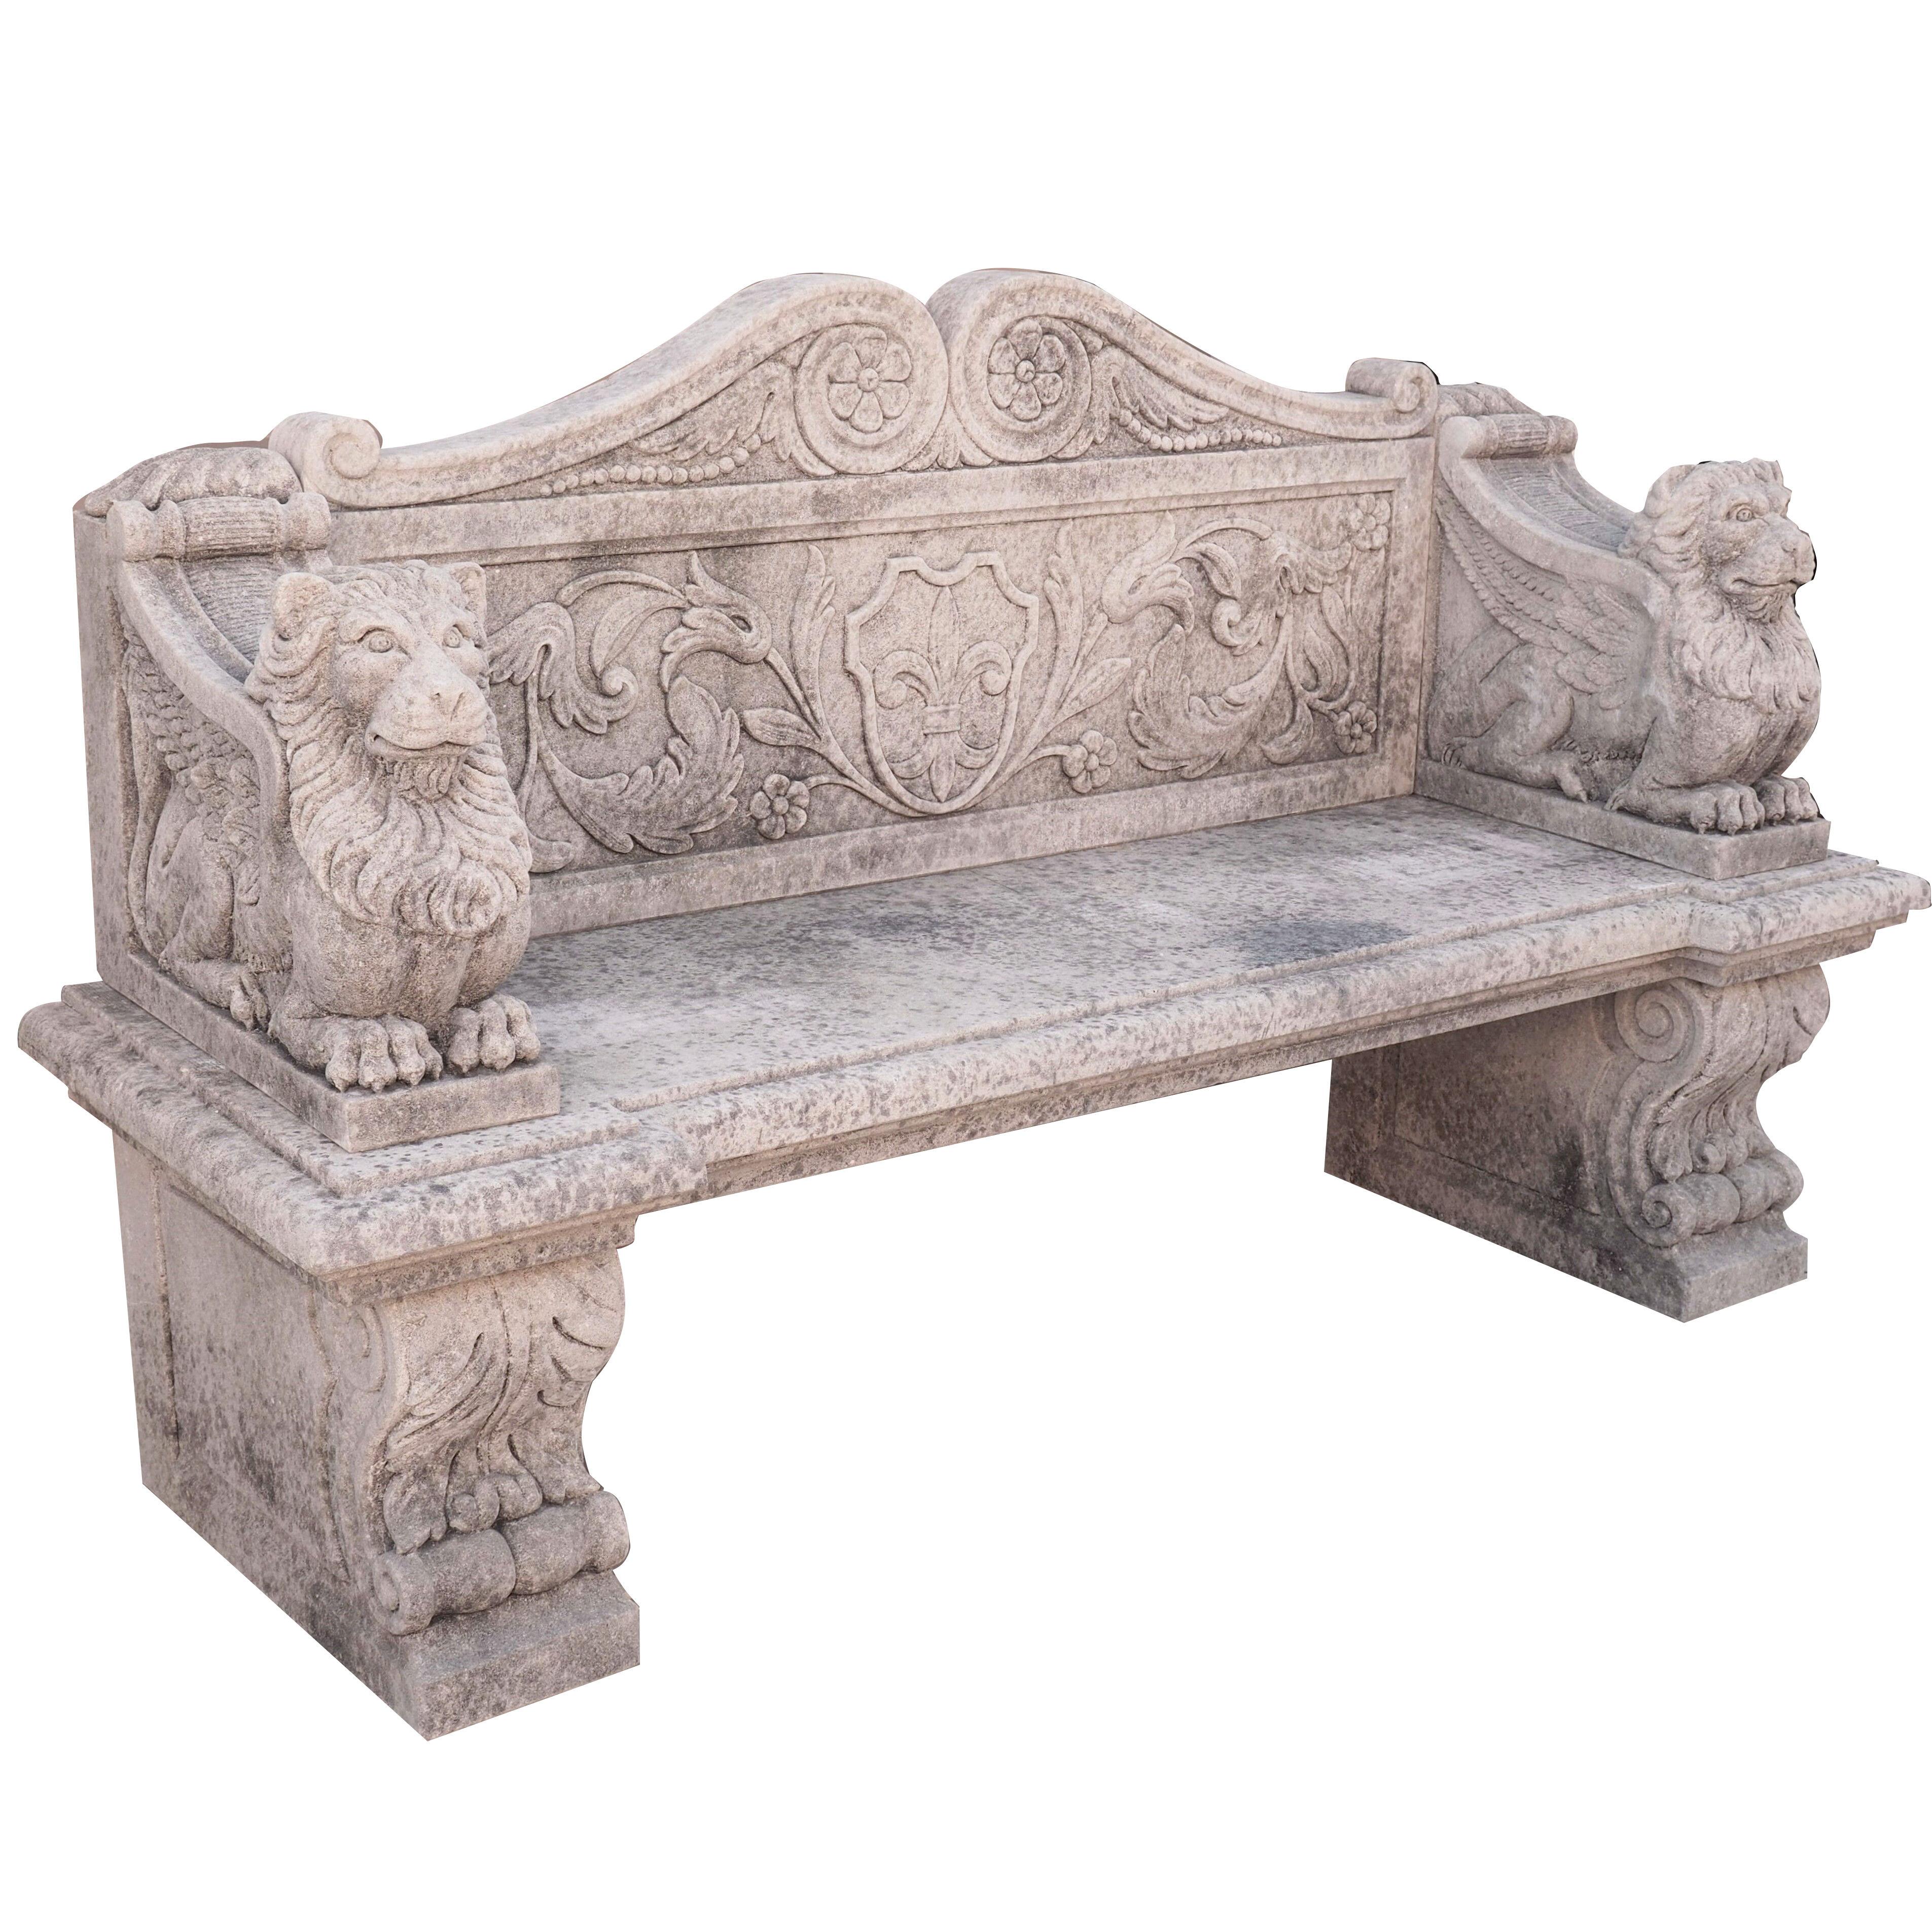 Carved Limestone Bench with Winged Lion Armrests, Scrolls, and Fleur De Lys